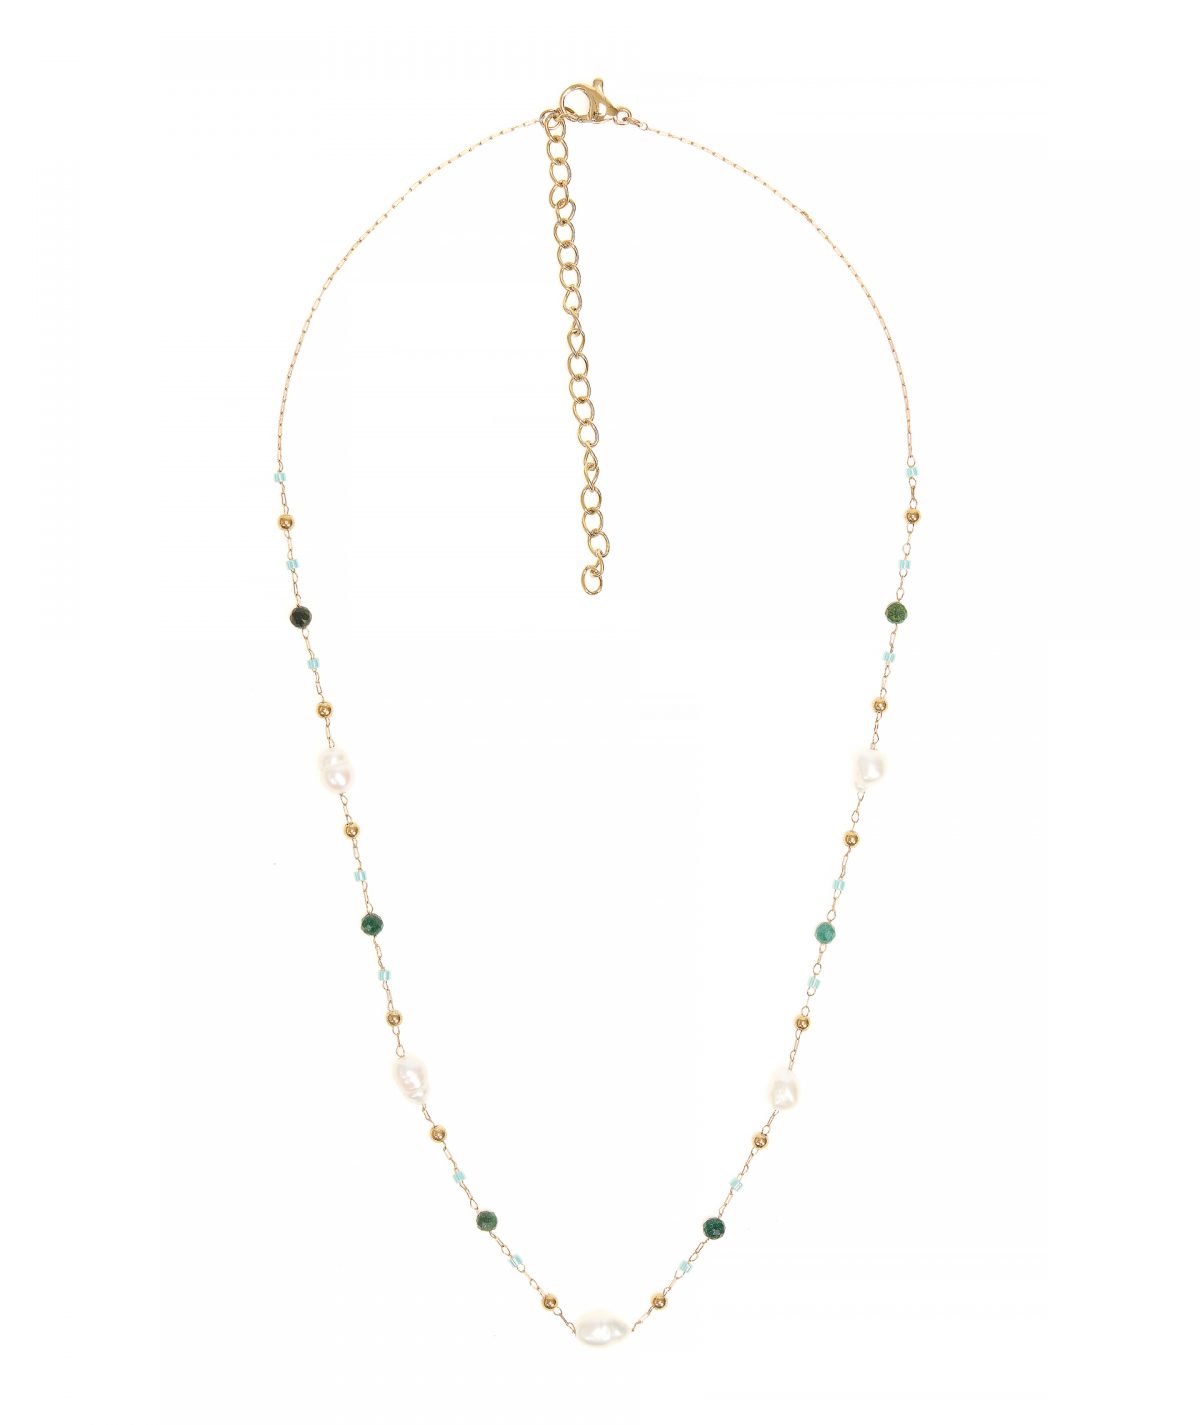 Pearls, Beads and Malachite Necklace by TFD